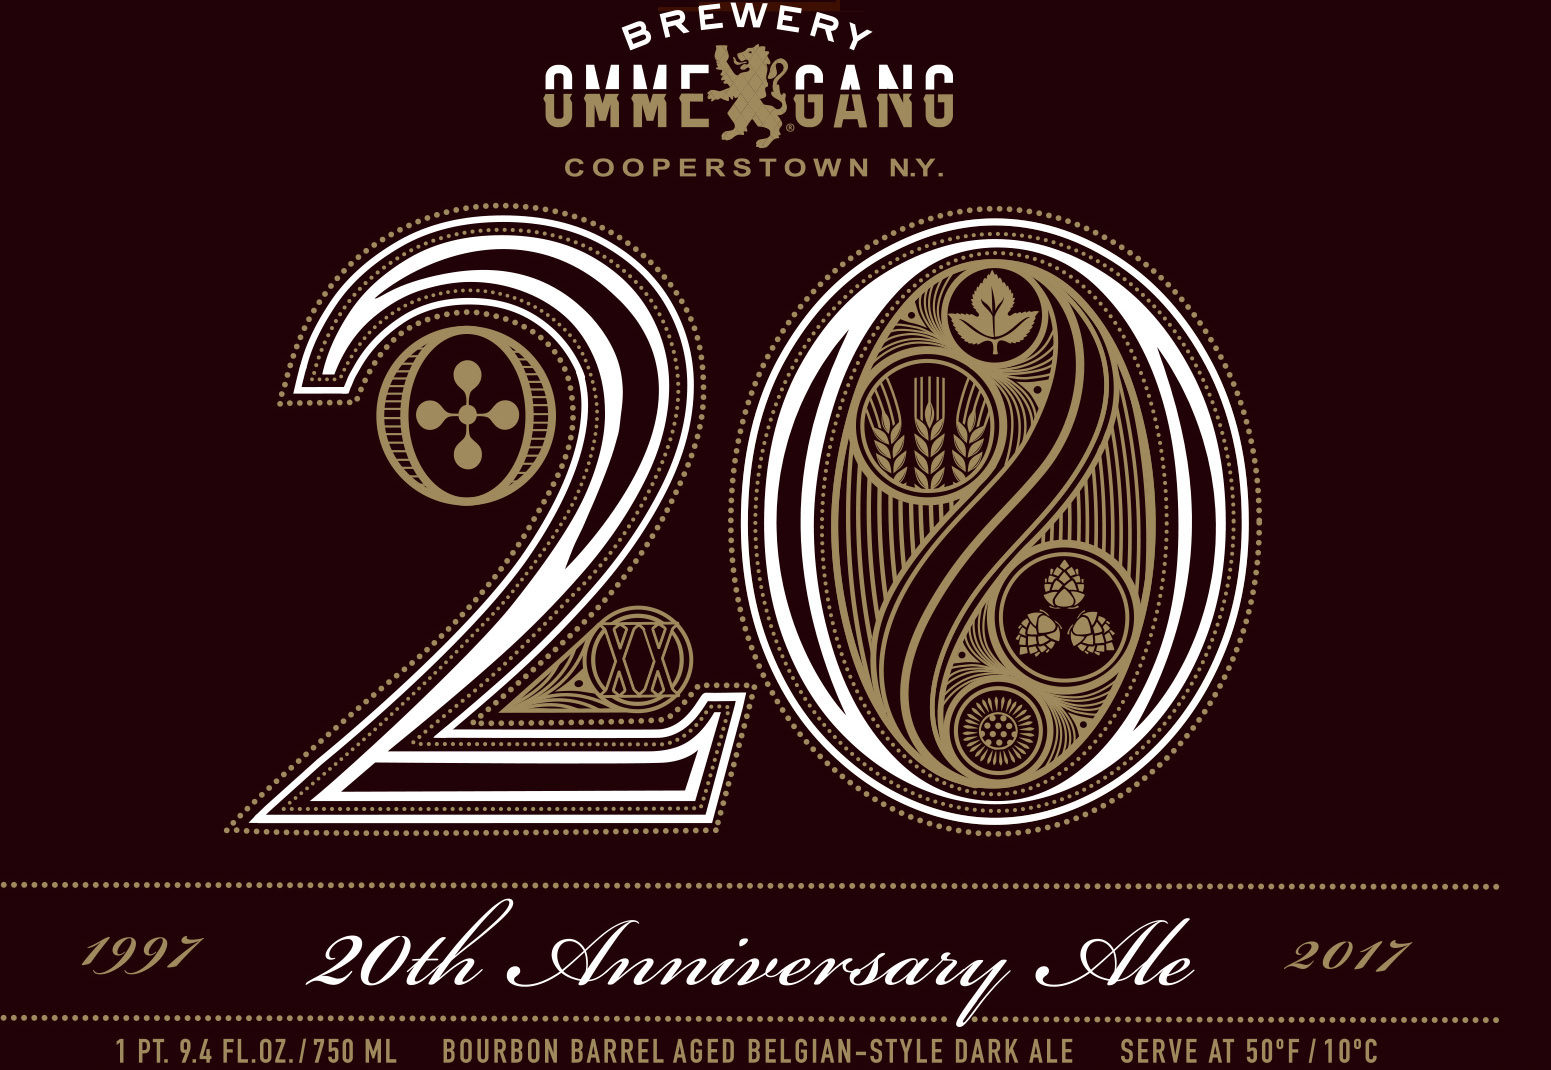 Ommegang 20th Anniversary